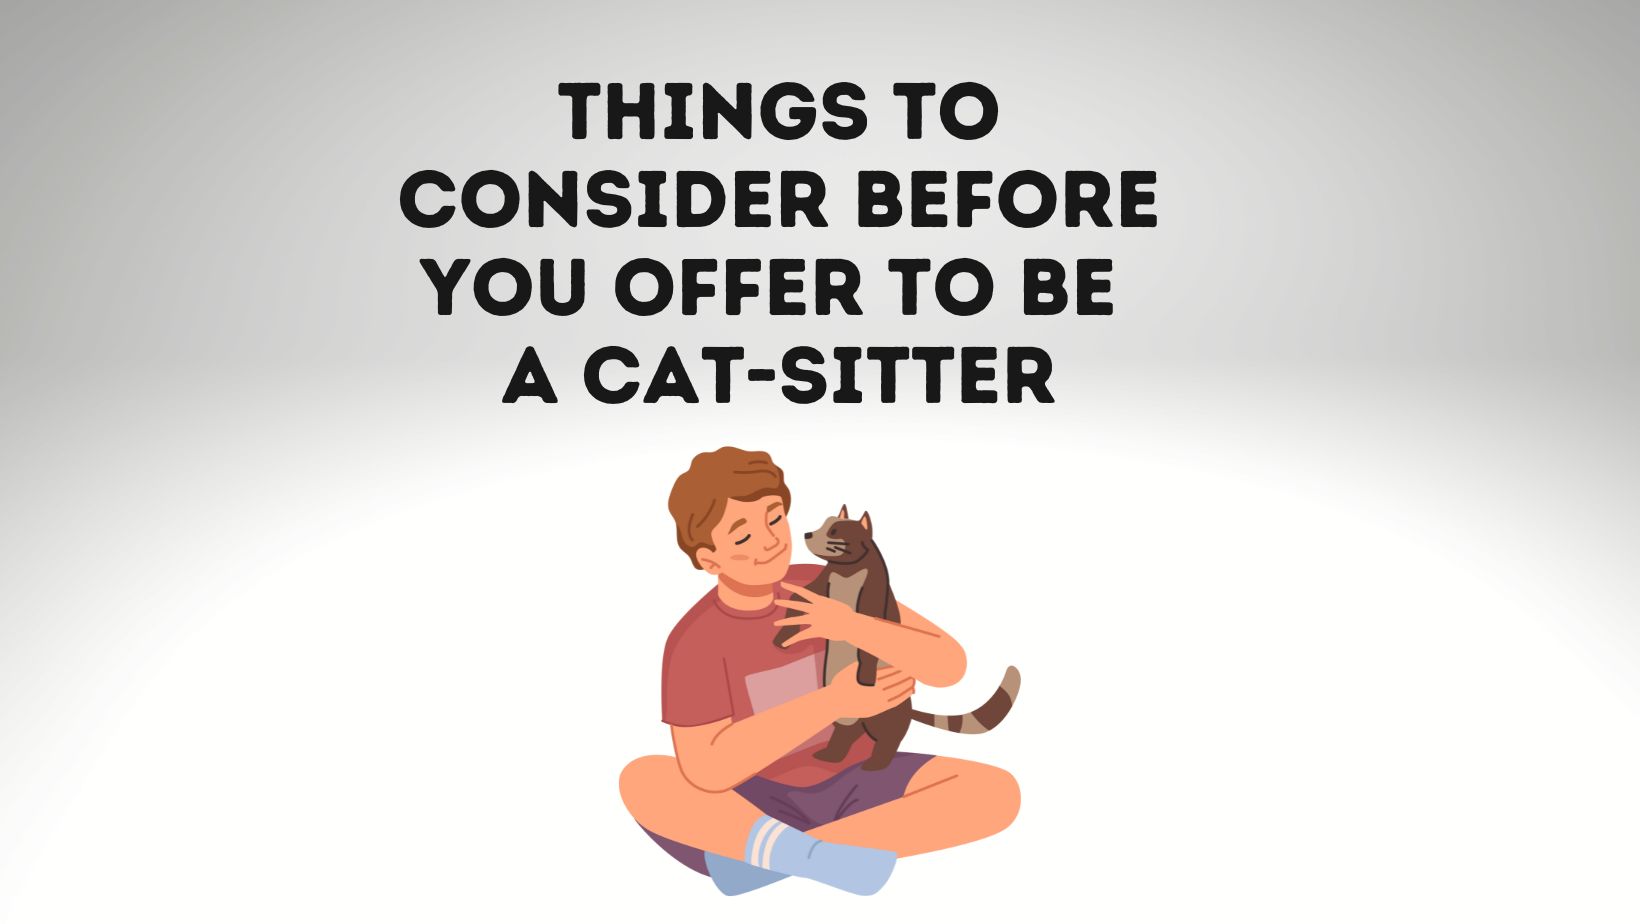 Things to Consider Before You Offer to Be a Cat-Sitter